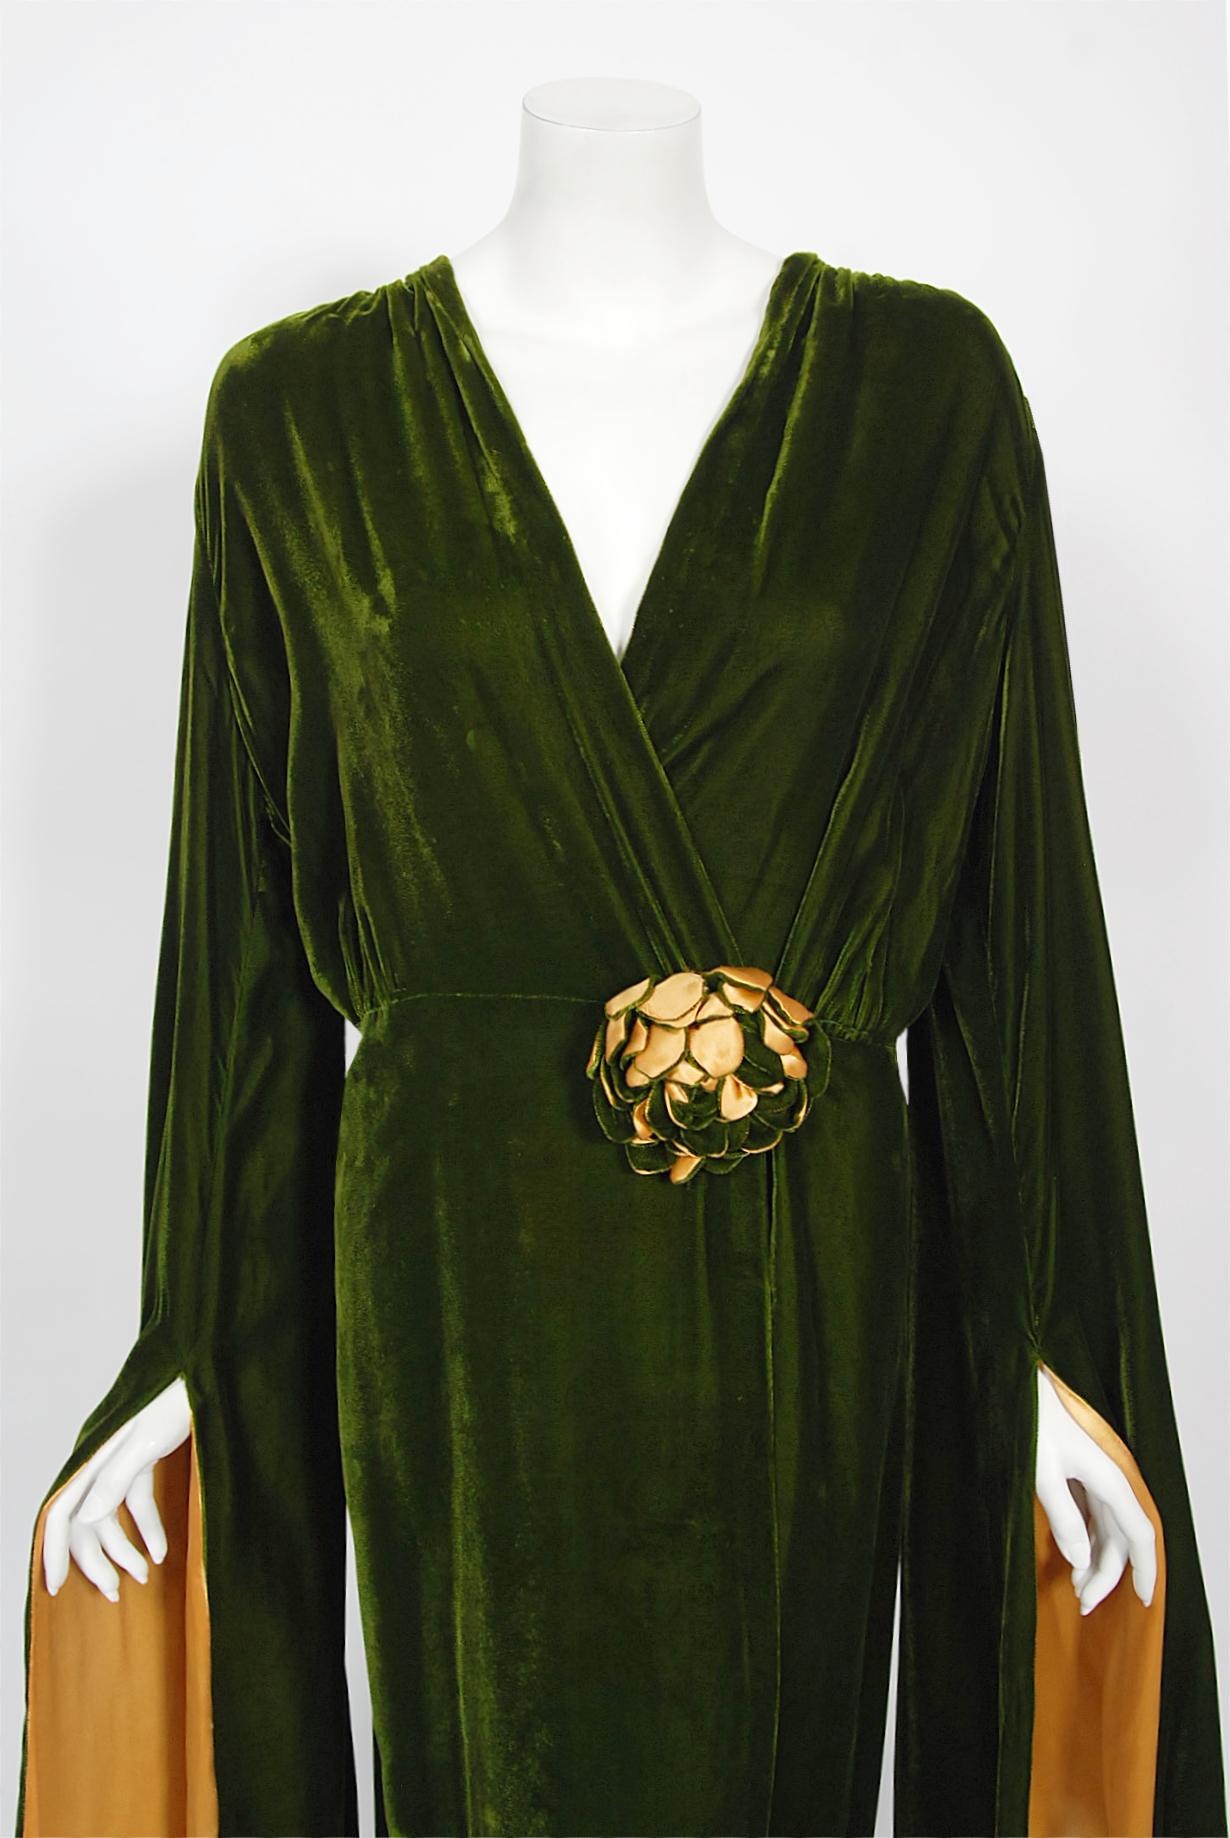 This breathtaking late 1930's dressing gown, designed by Princess Helene Obolensky, has a seductive allure that I find irresistible. Obolensky started as a personal assistant to Coco Chanel and later immigrated to the United States, where she became